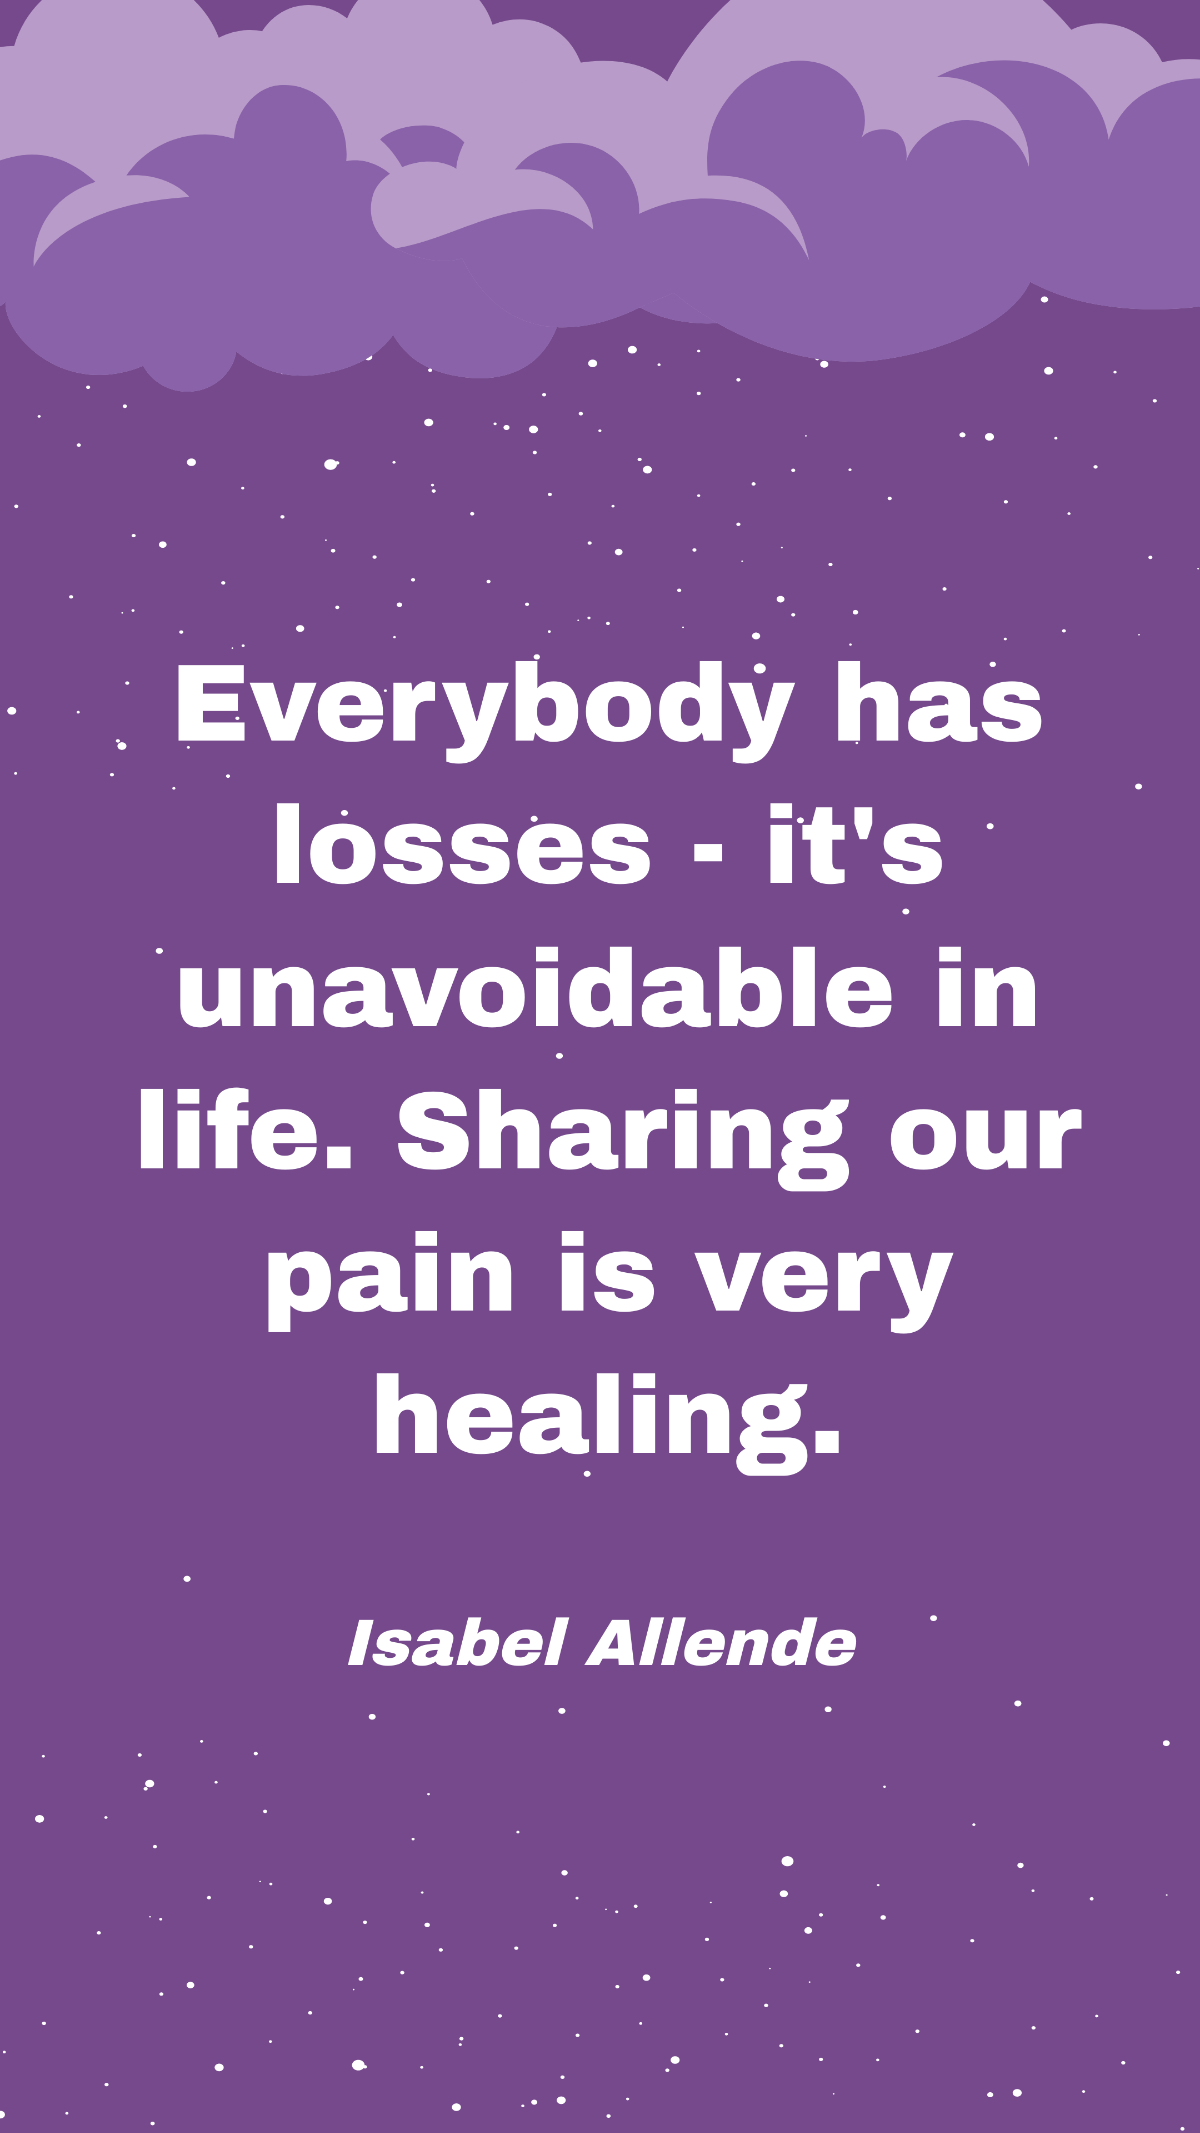 Free Isabel Allende - Everybody has losses - it's unavoidable in life. Sharing our pain is very healing. Template